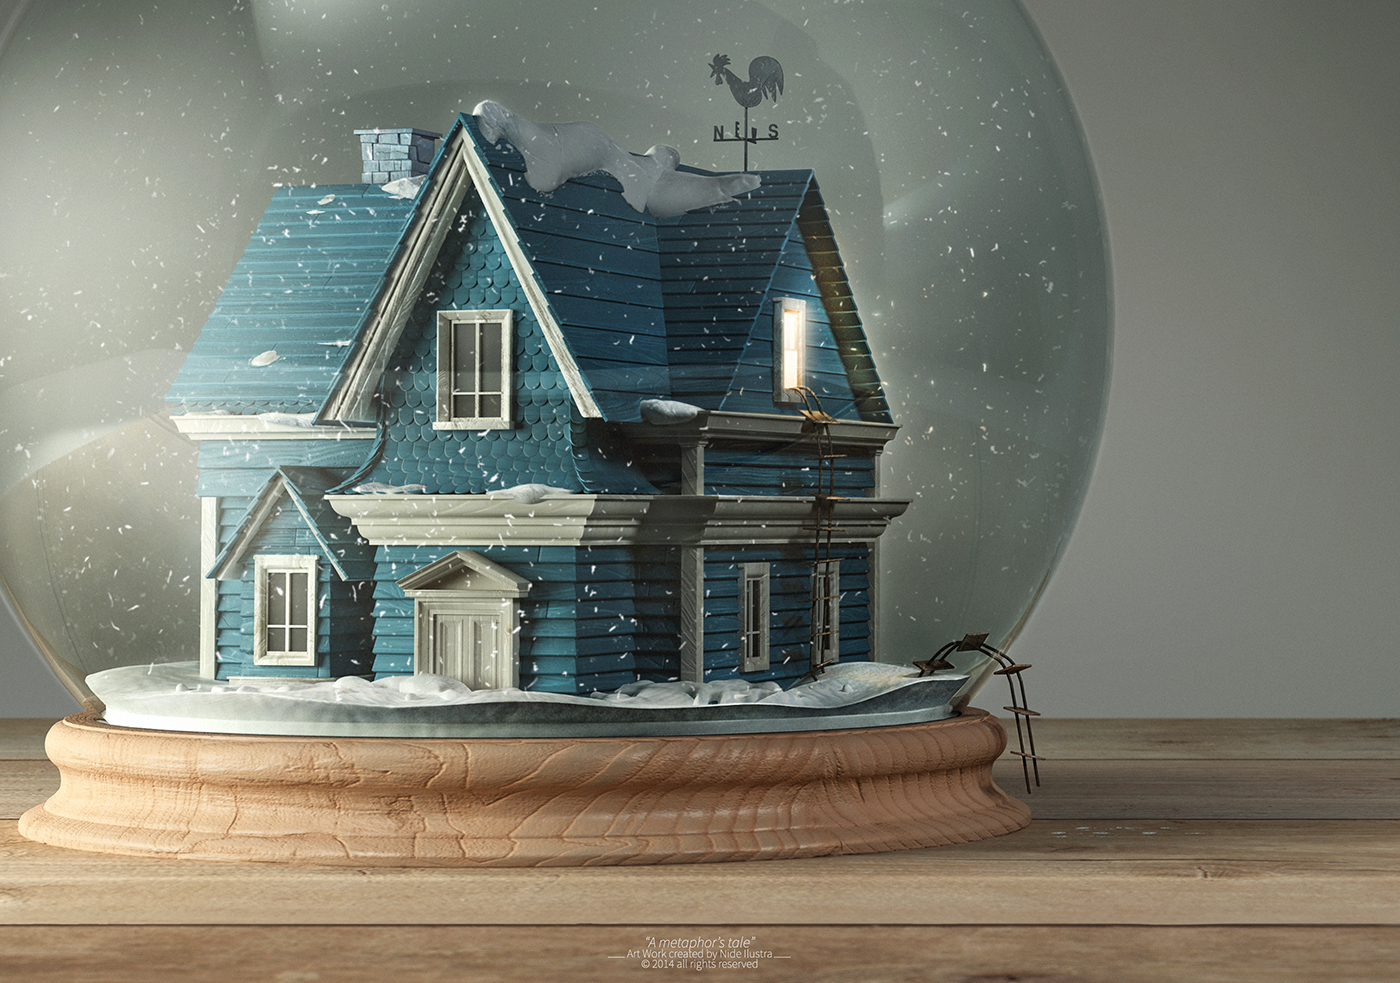 3D texturing rendering snow snowglobes metafora story colonial house tale Inspiration Is